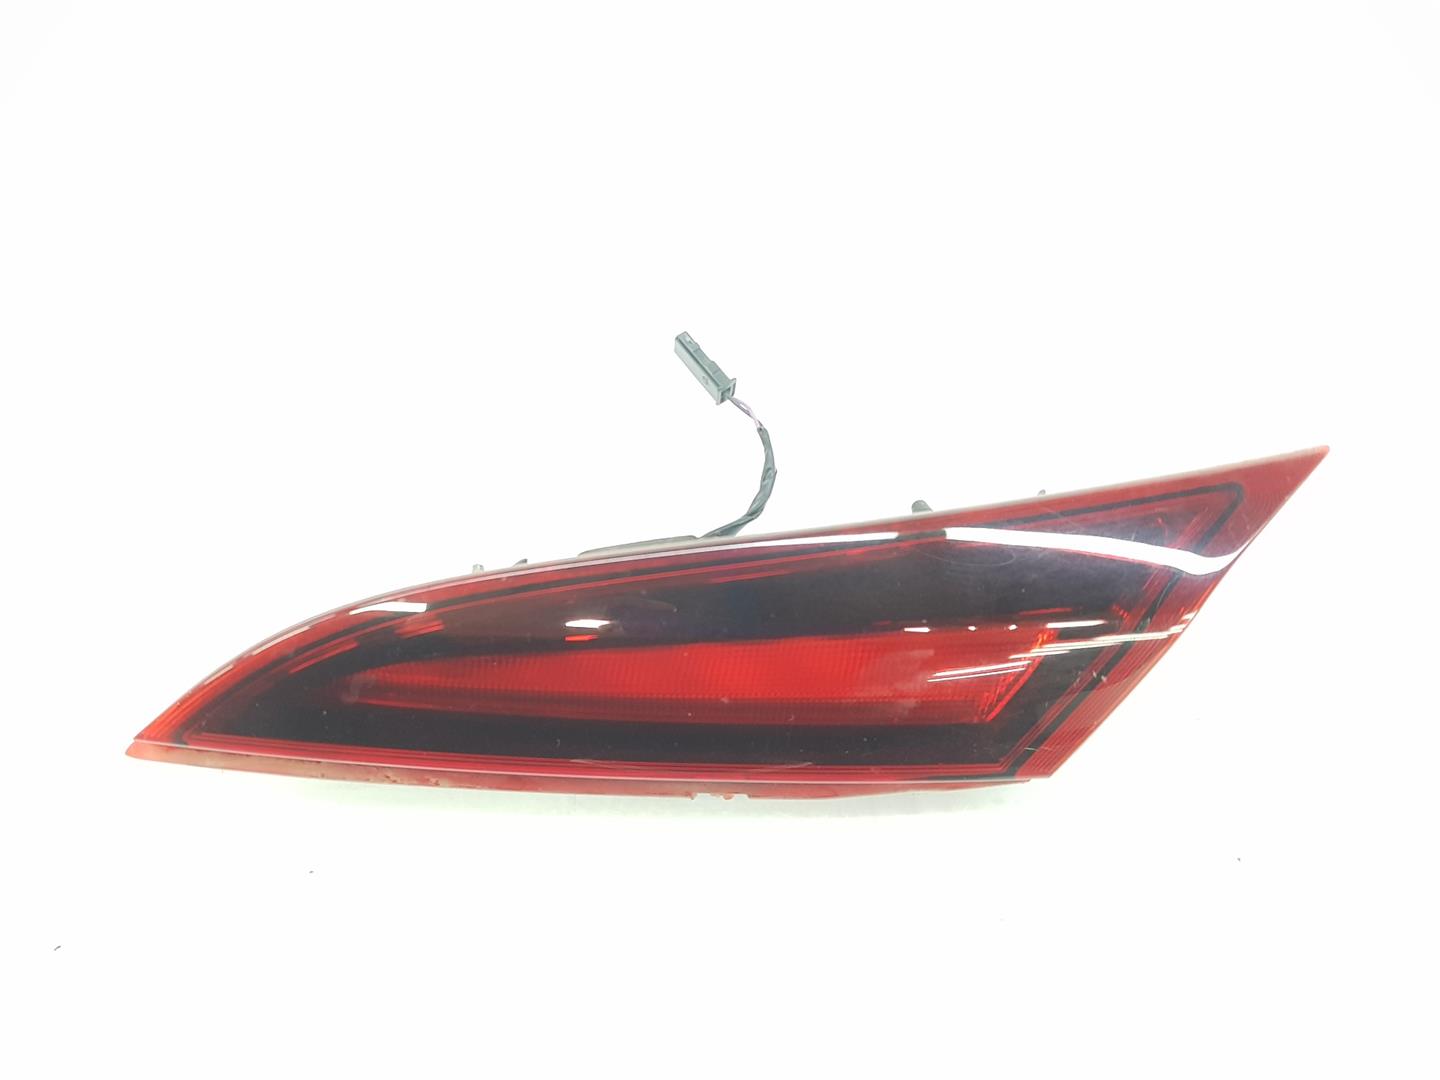 OPEL Insignia A (2008-2016) Rear Right Taillight Lamp 39024221, 22756314, 2222DL 24128468